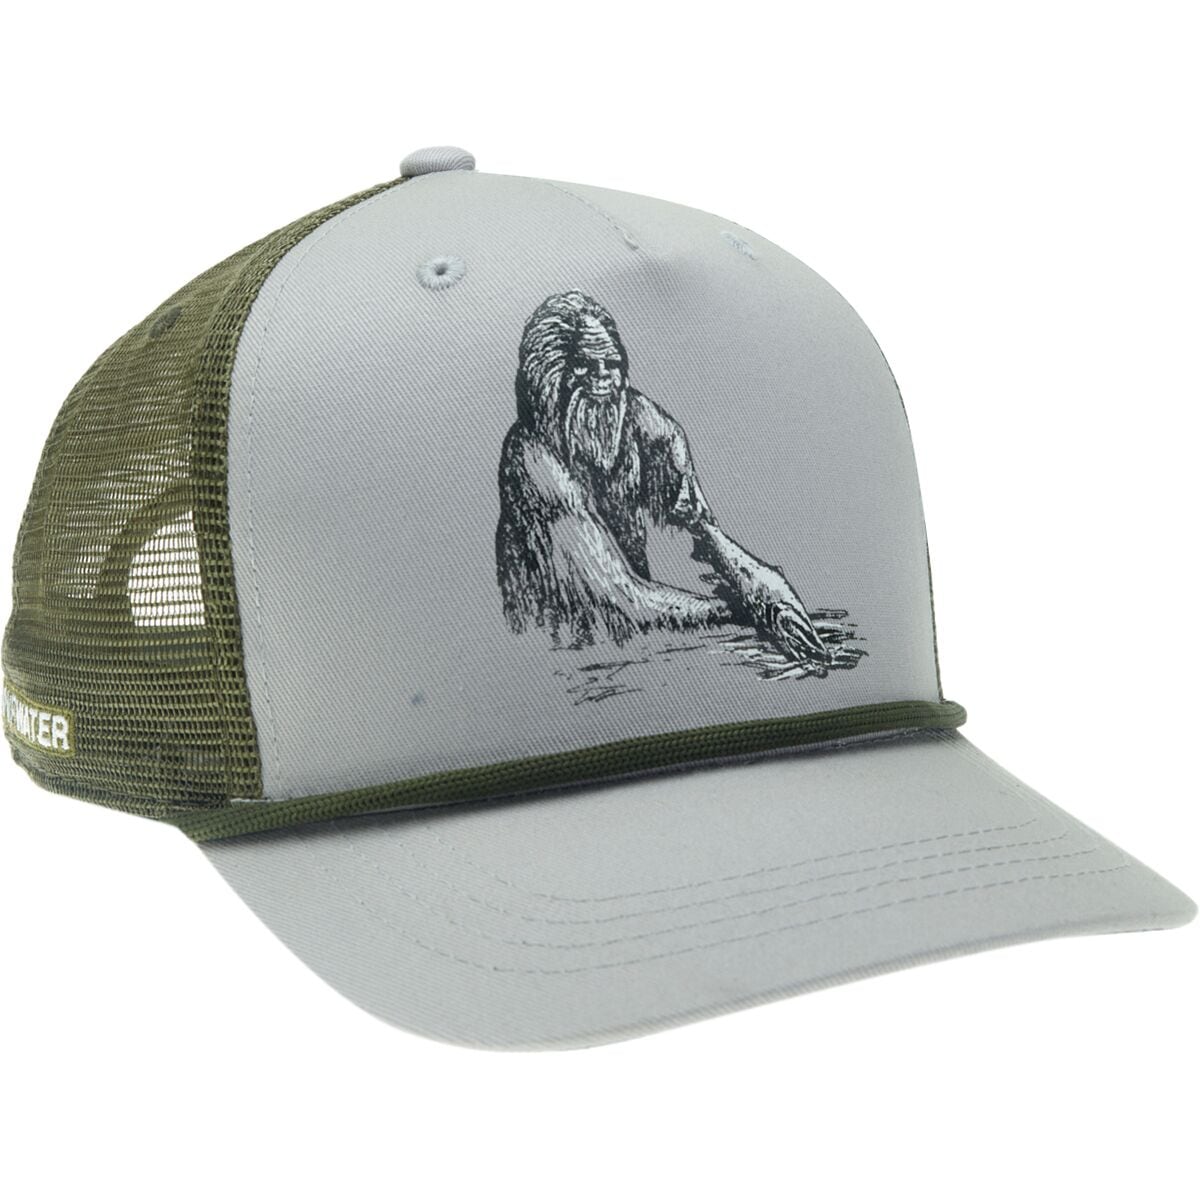 Rep Your Water Squatch & Release 2.0 Trucker Hat